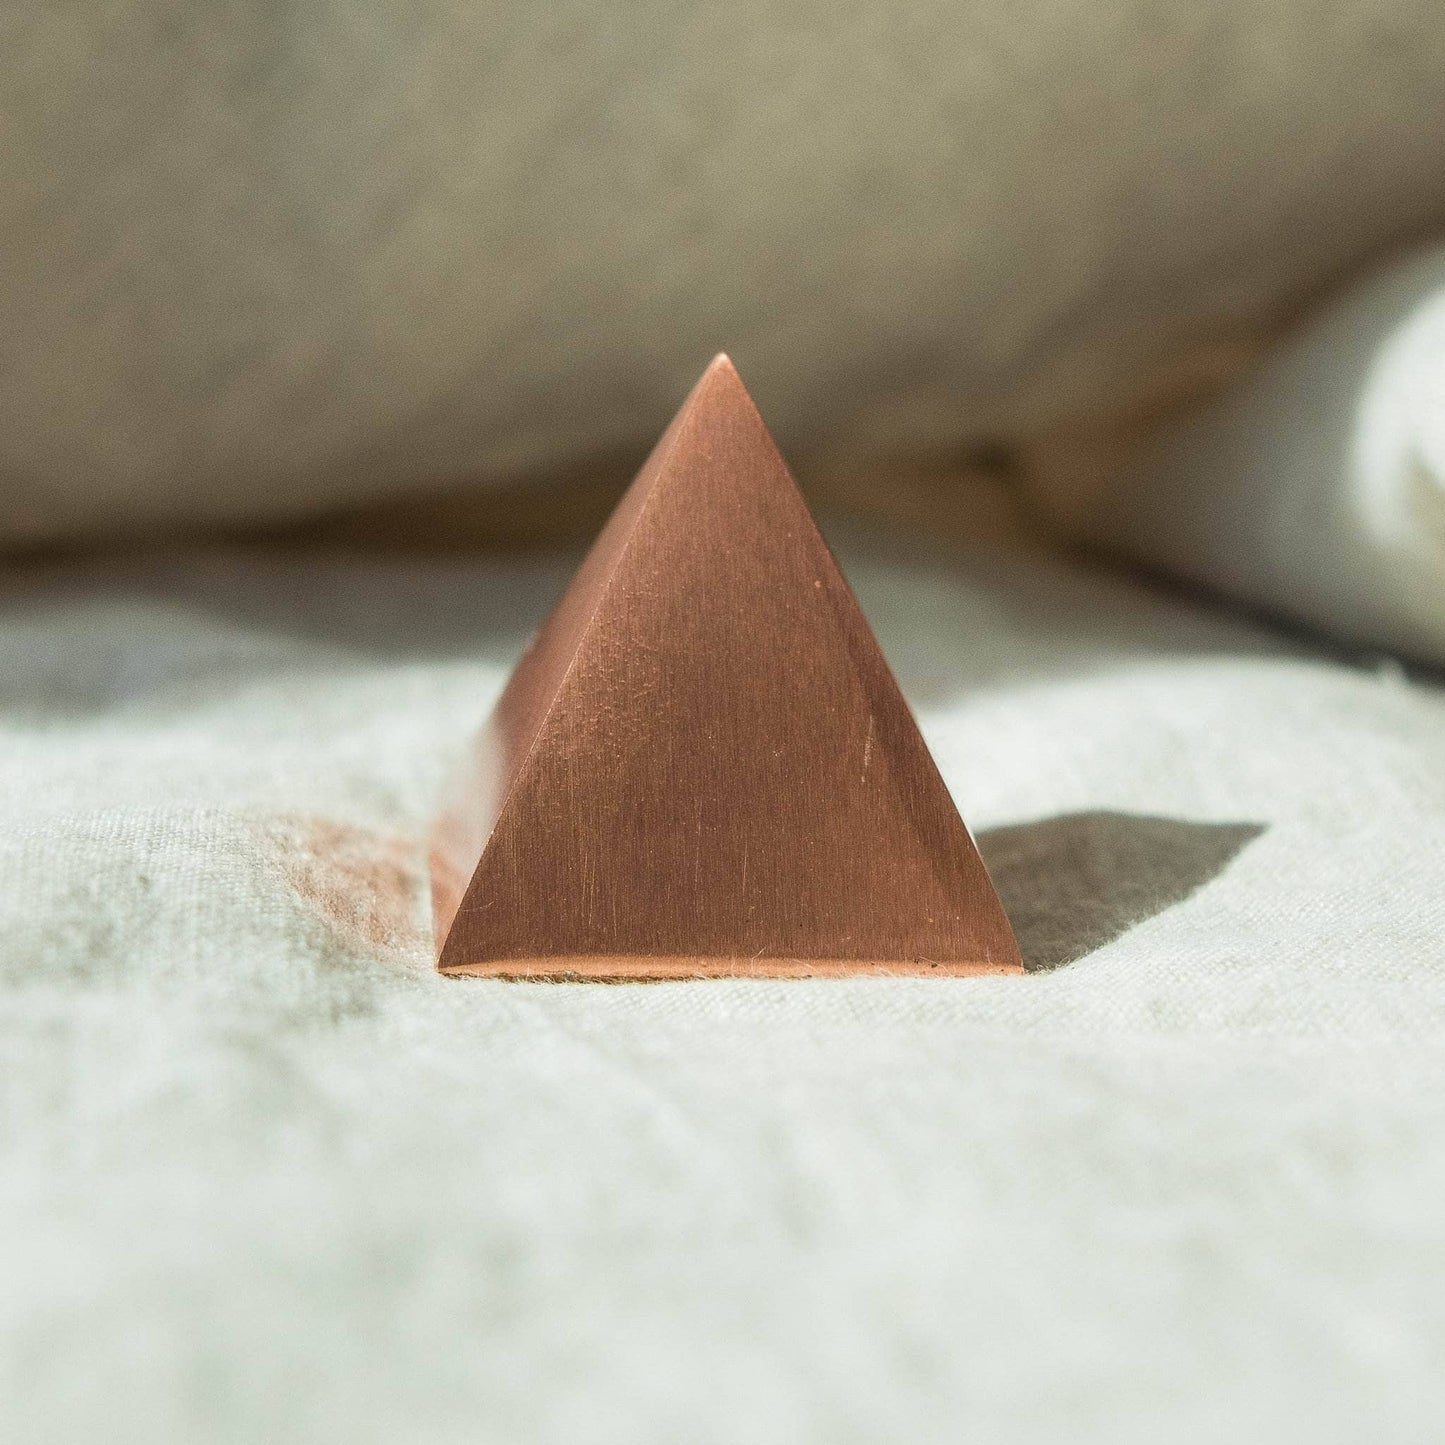 Copper Healing Pyramid by Tiny Rituals